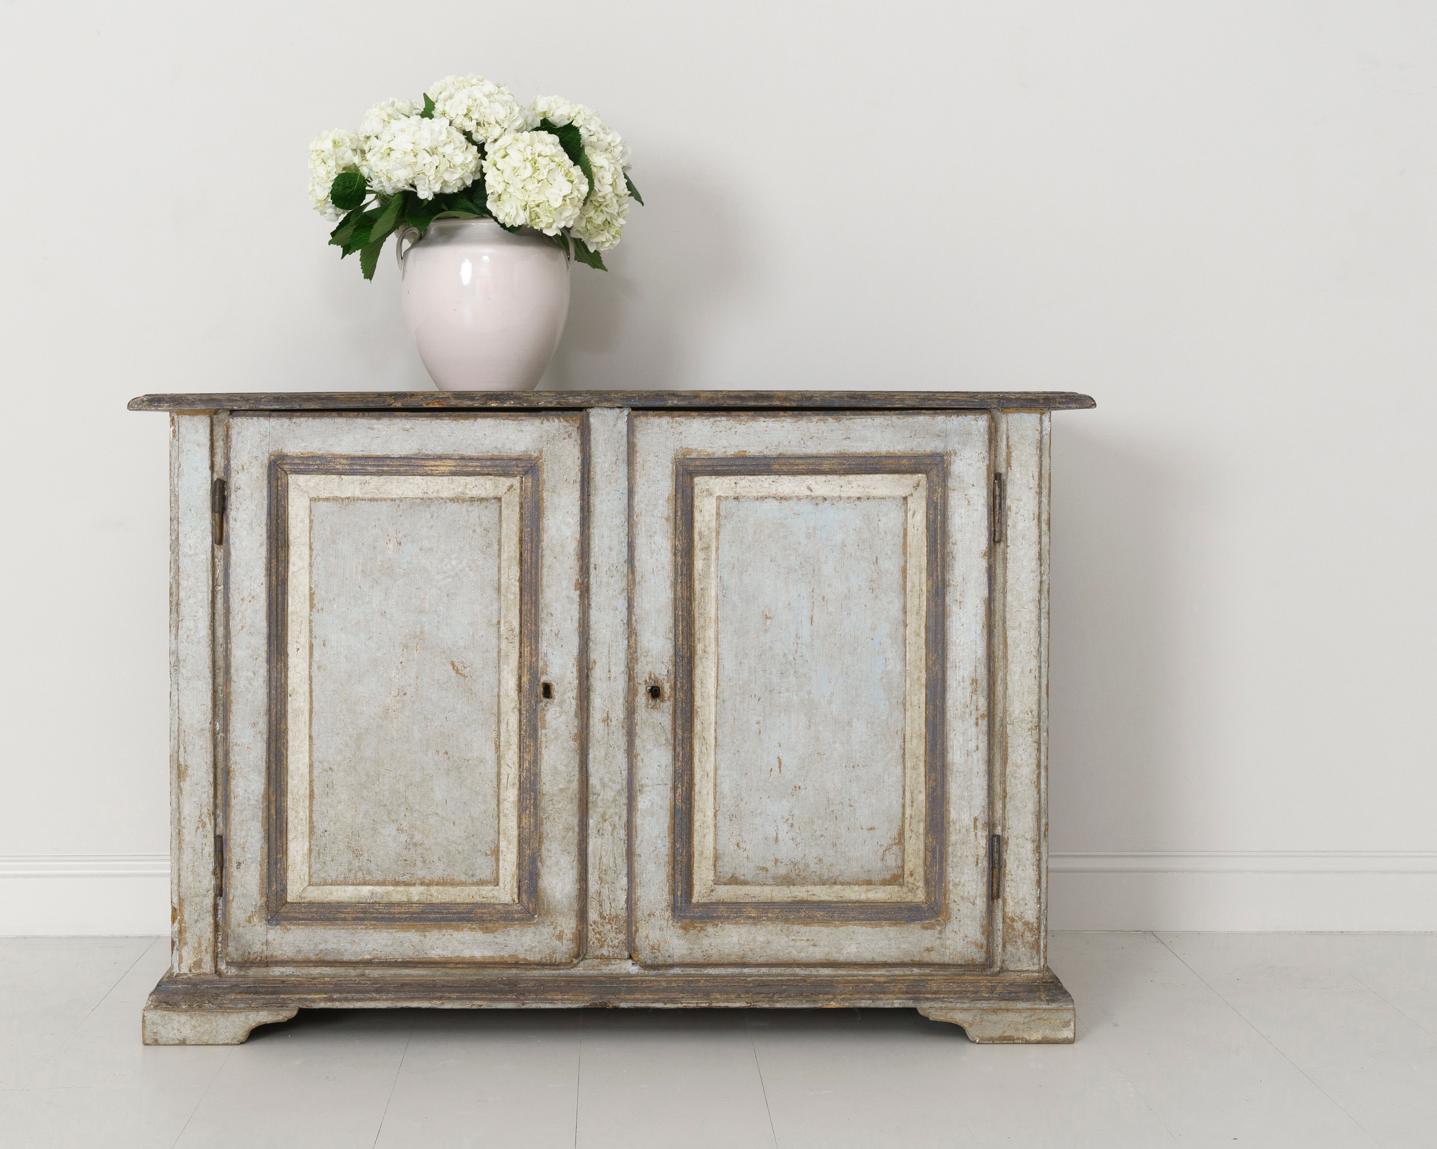 An incredible early 19th century Italian buffet sideboard, circa 1820, in original paint found in Abruzzo, Italy. The doors open to reveal two drawers with original insets and three fixed shelves. The overall patina is a beautiful soft blue - gray